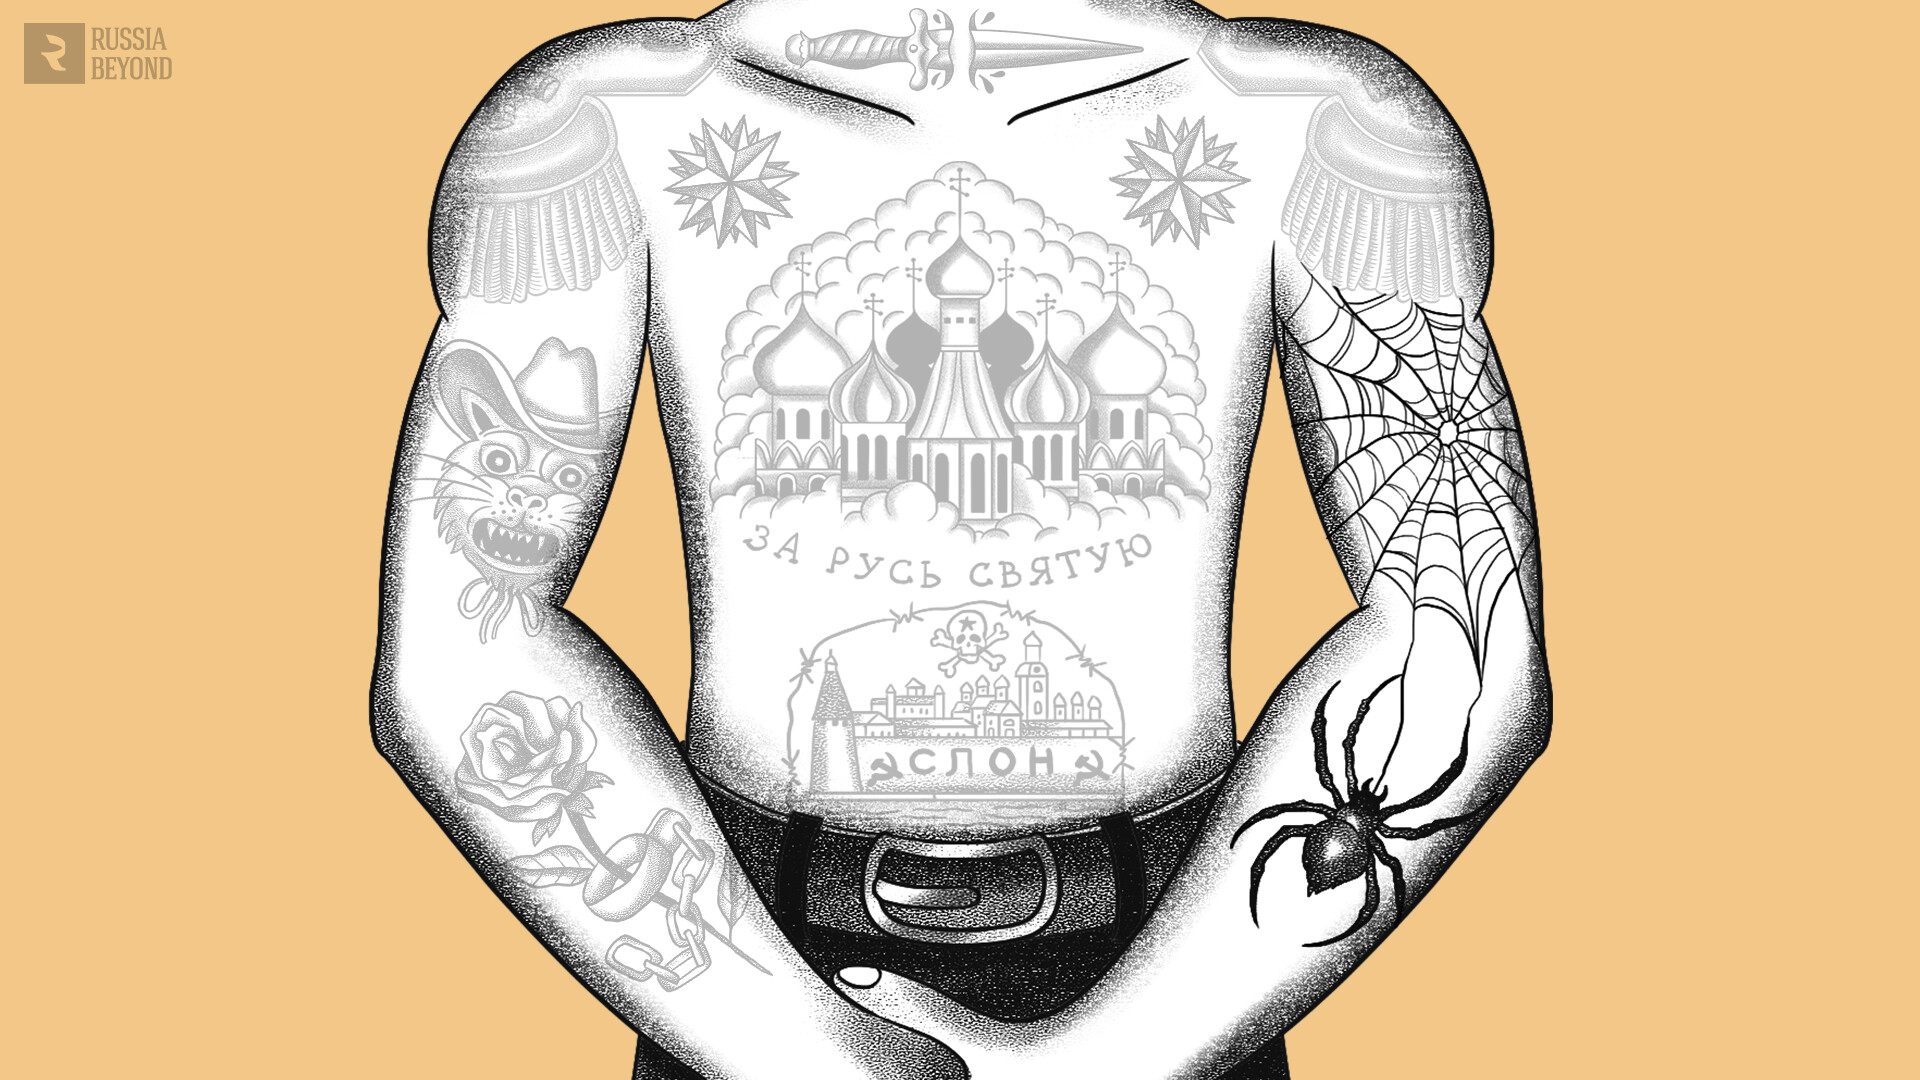 American Traditional Tattoos - The Honorable Society Los Angeles